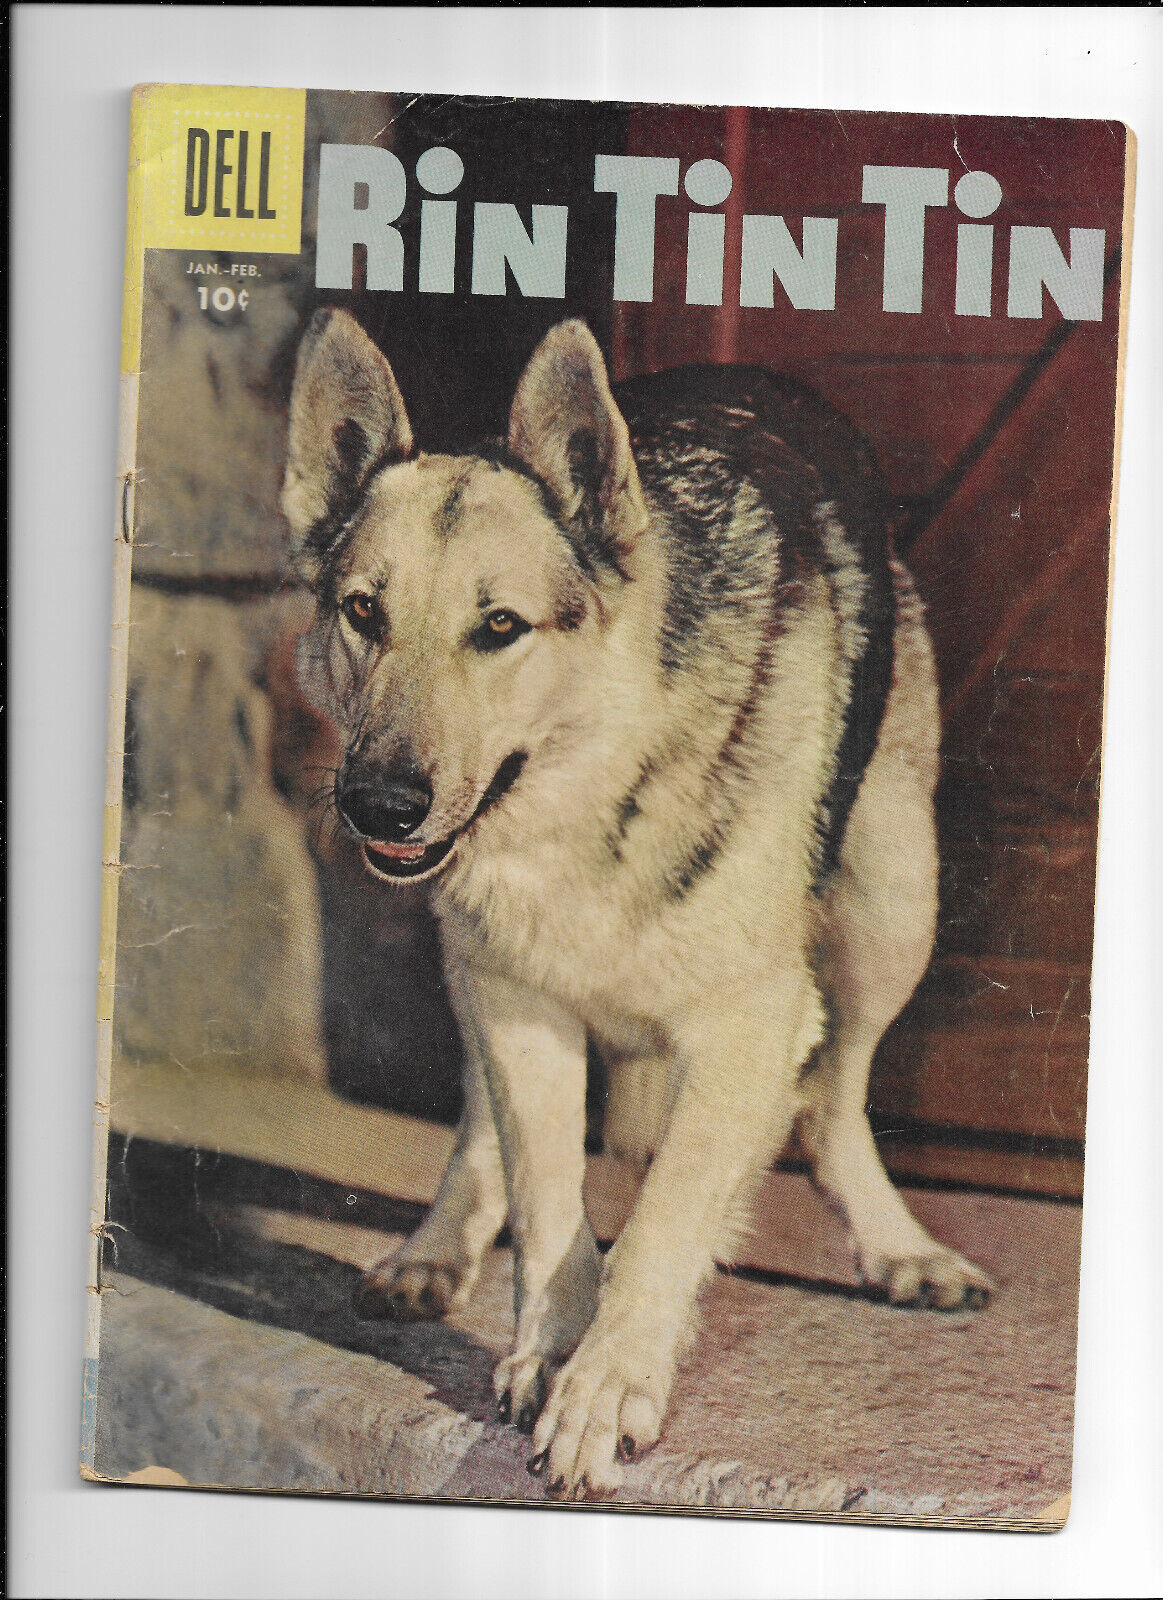 RIN TIN TIN #17 {JAN-FEB 1957 DELL} EARLY SILVER AGE! VG CONDITION "WOLF-DOG"!